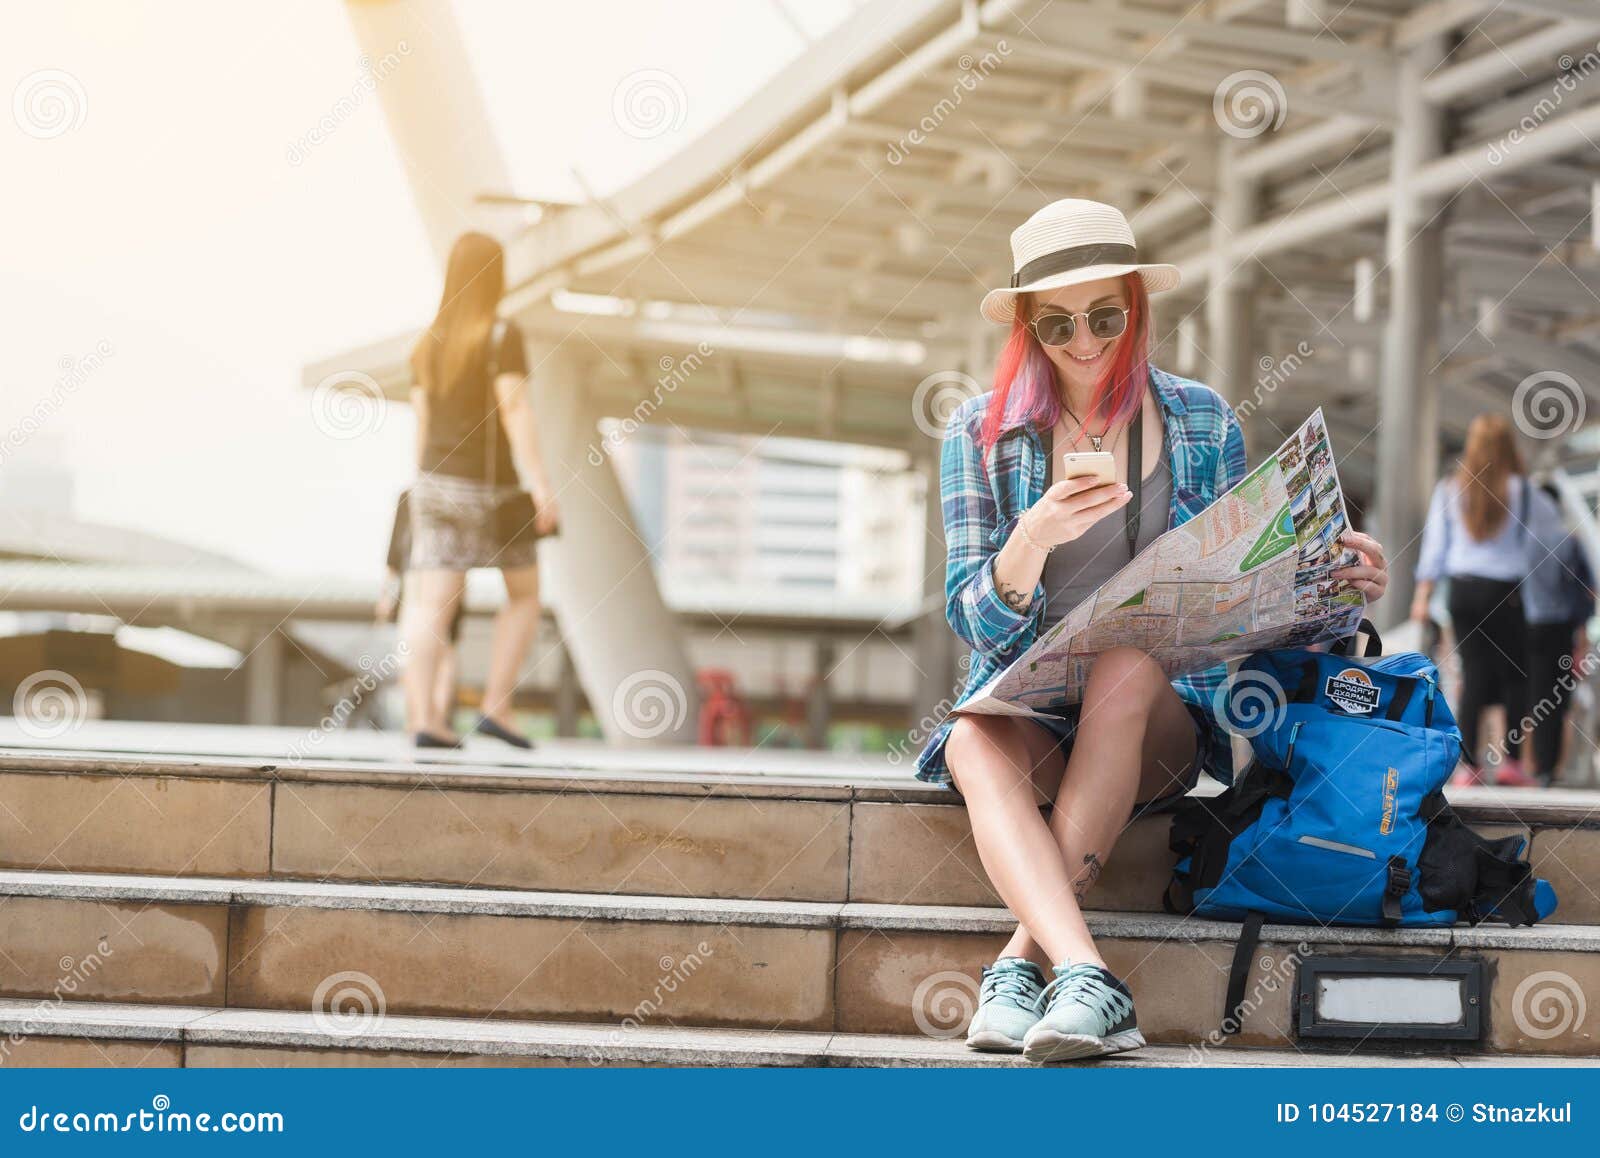 woman westerner looking at map and smartphone during city tour i